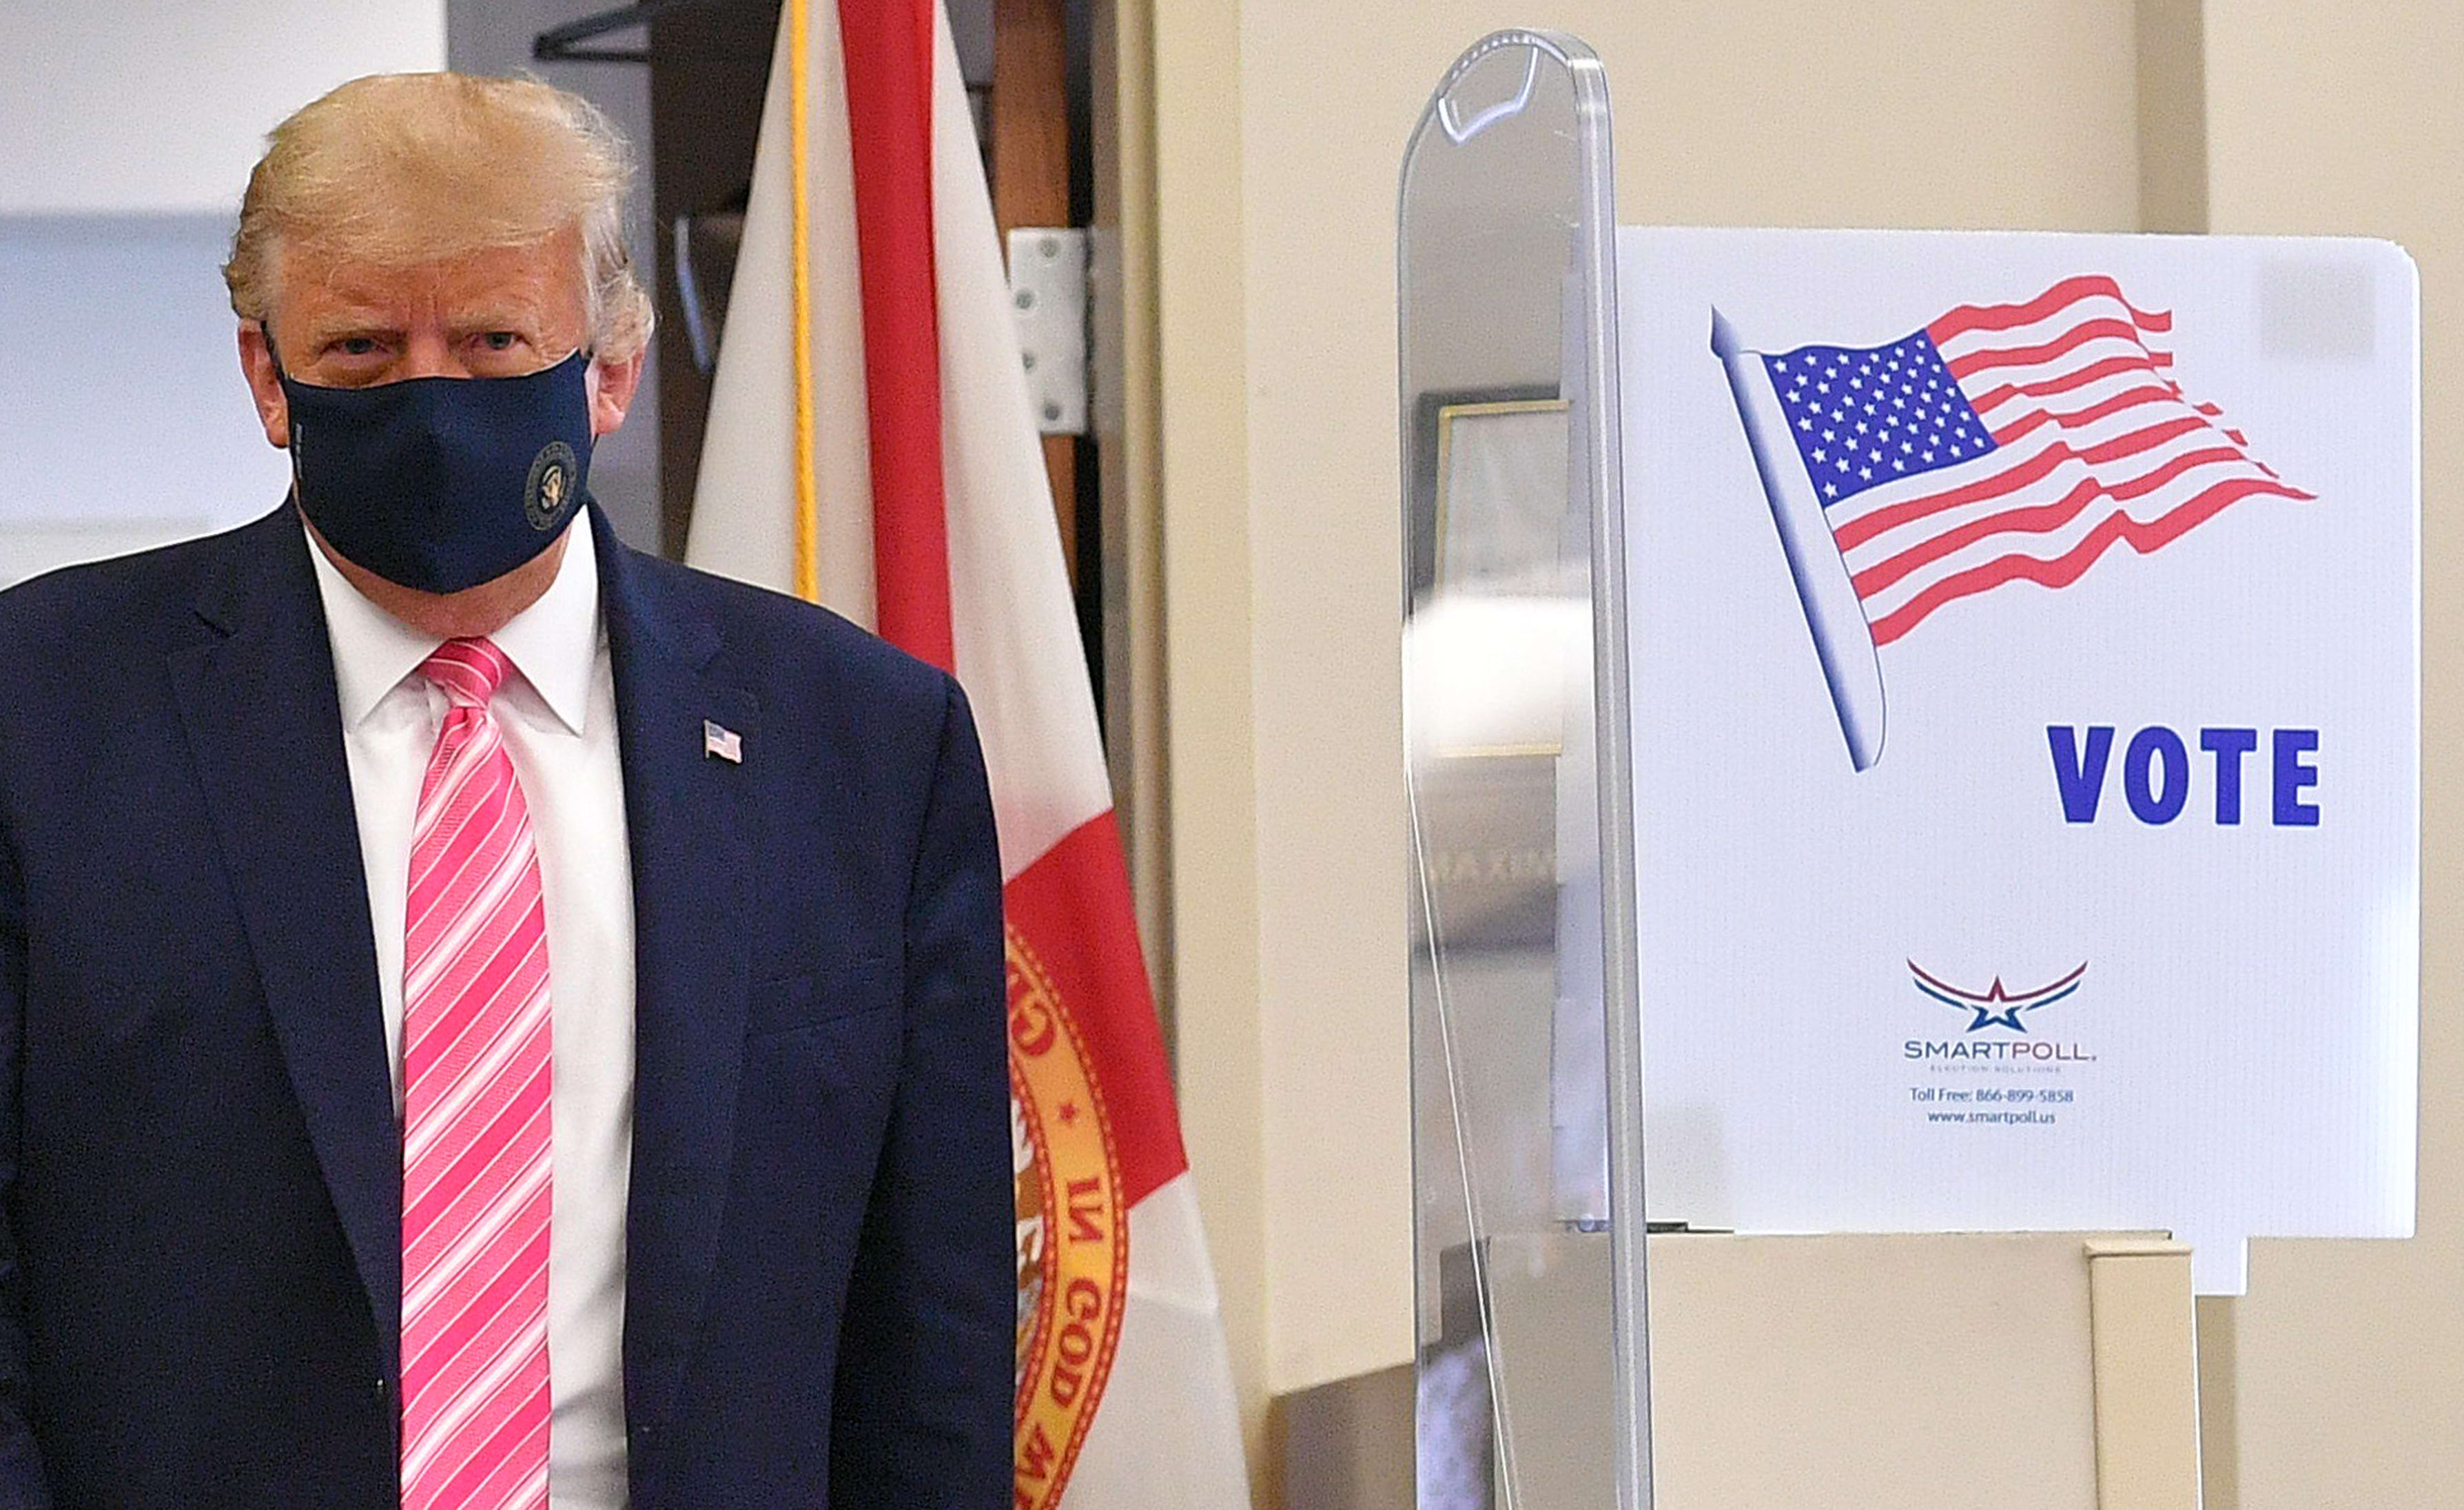 Donald Trump leaves the polling station after casting his ballot at the Palm Beach County Public Library, during early voting for the 3 November election.